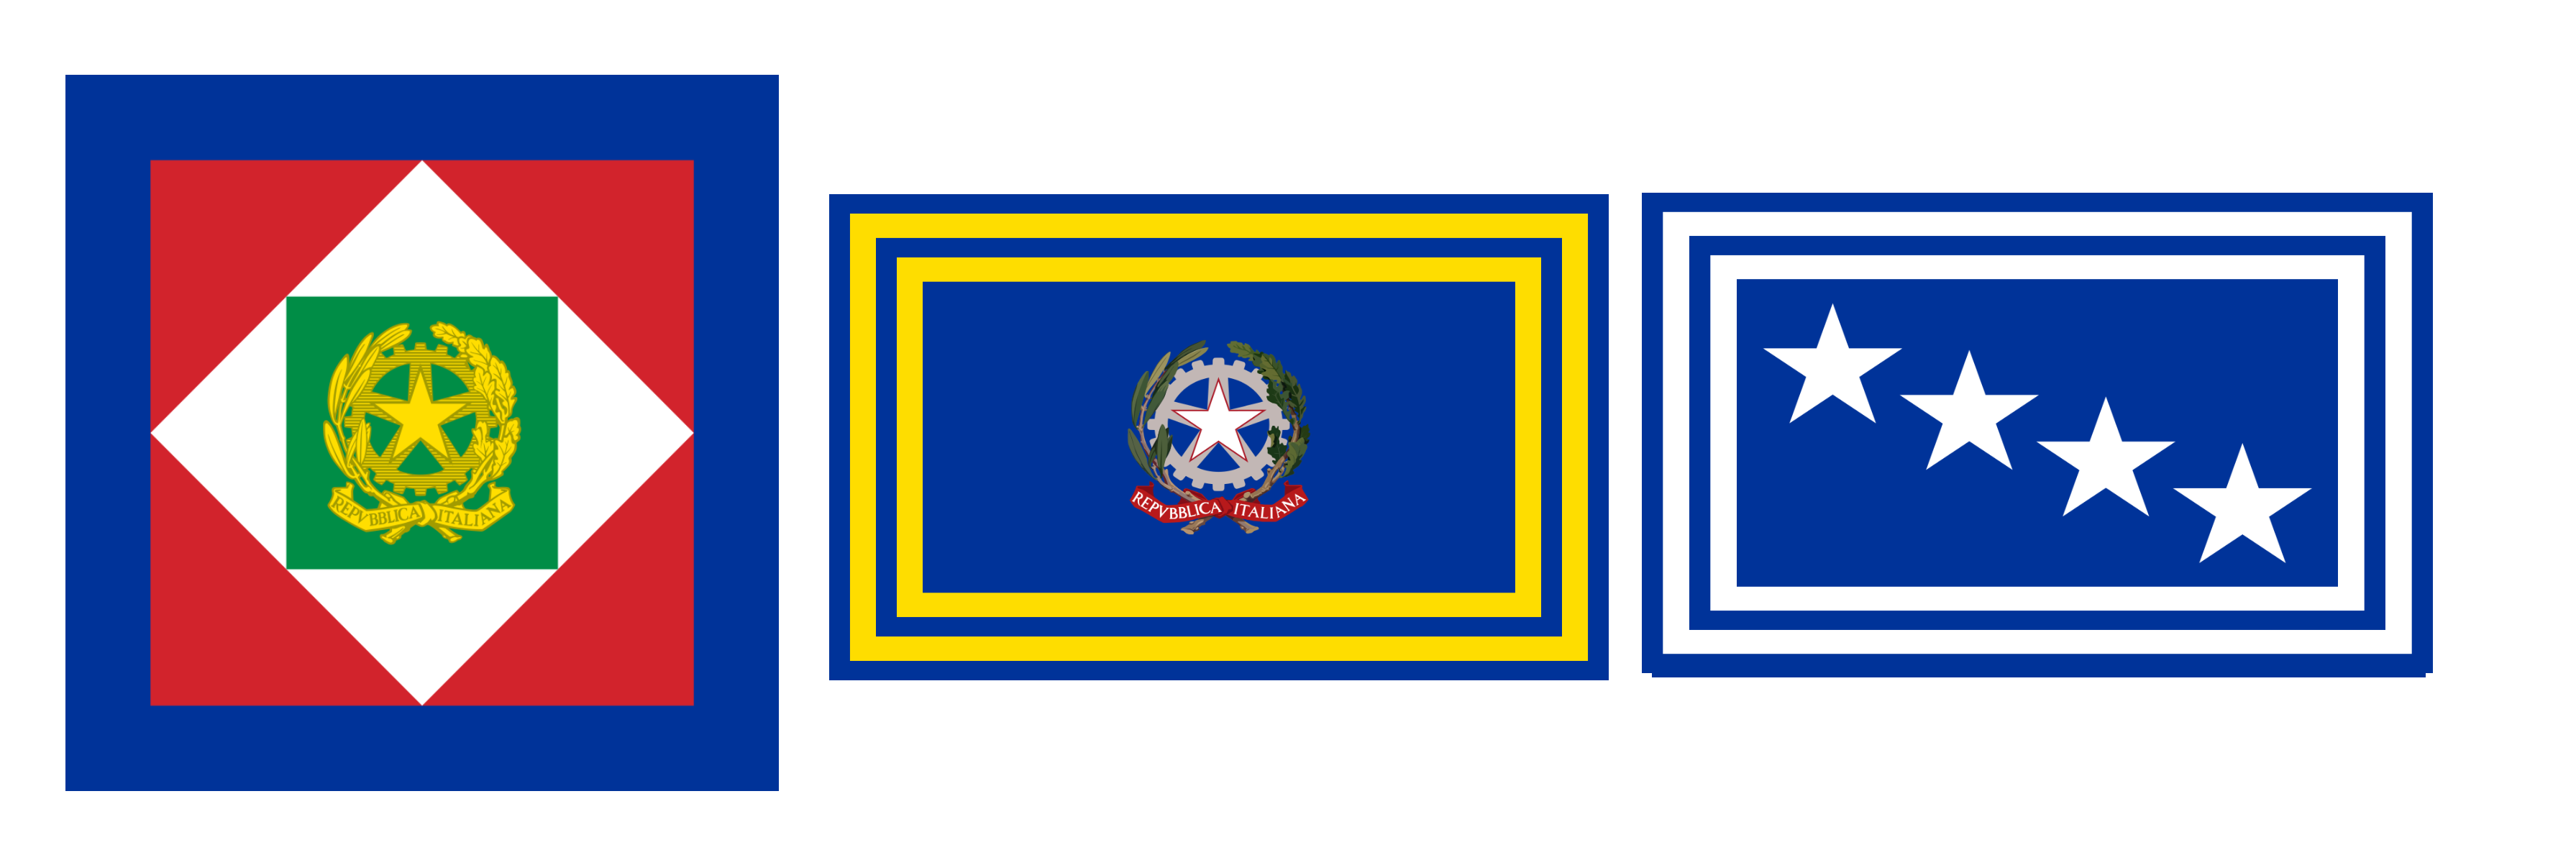 900px-Royal_Standard_of_Italy_18801946svgpng